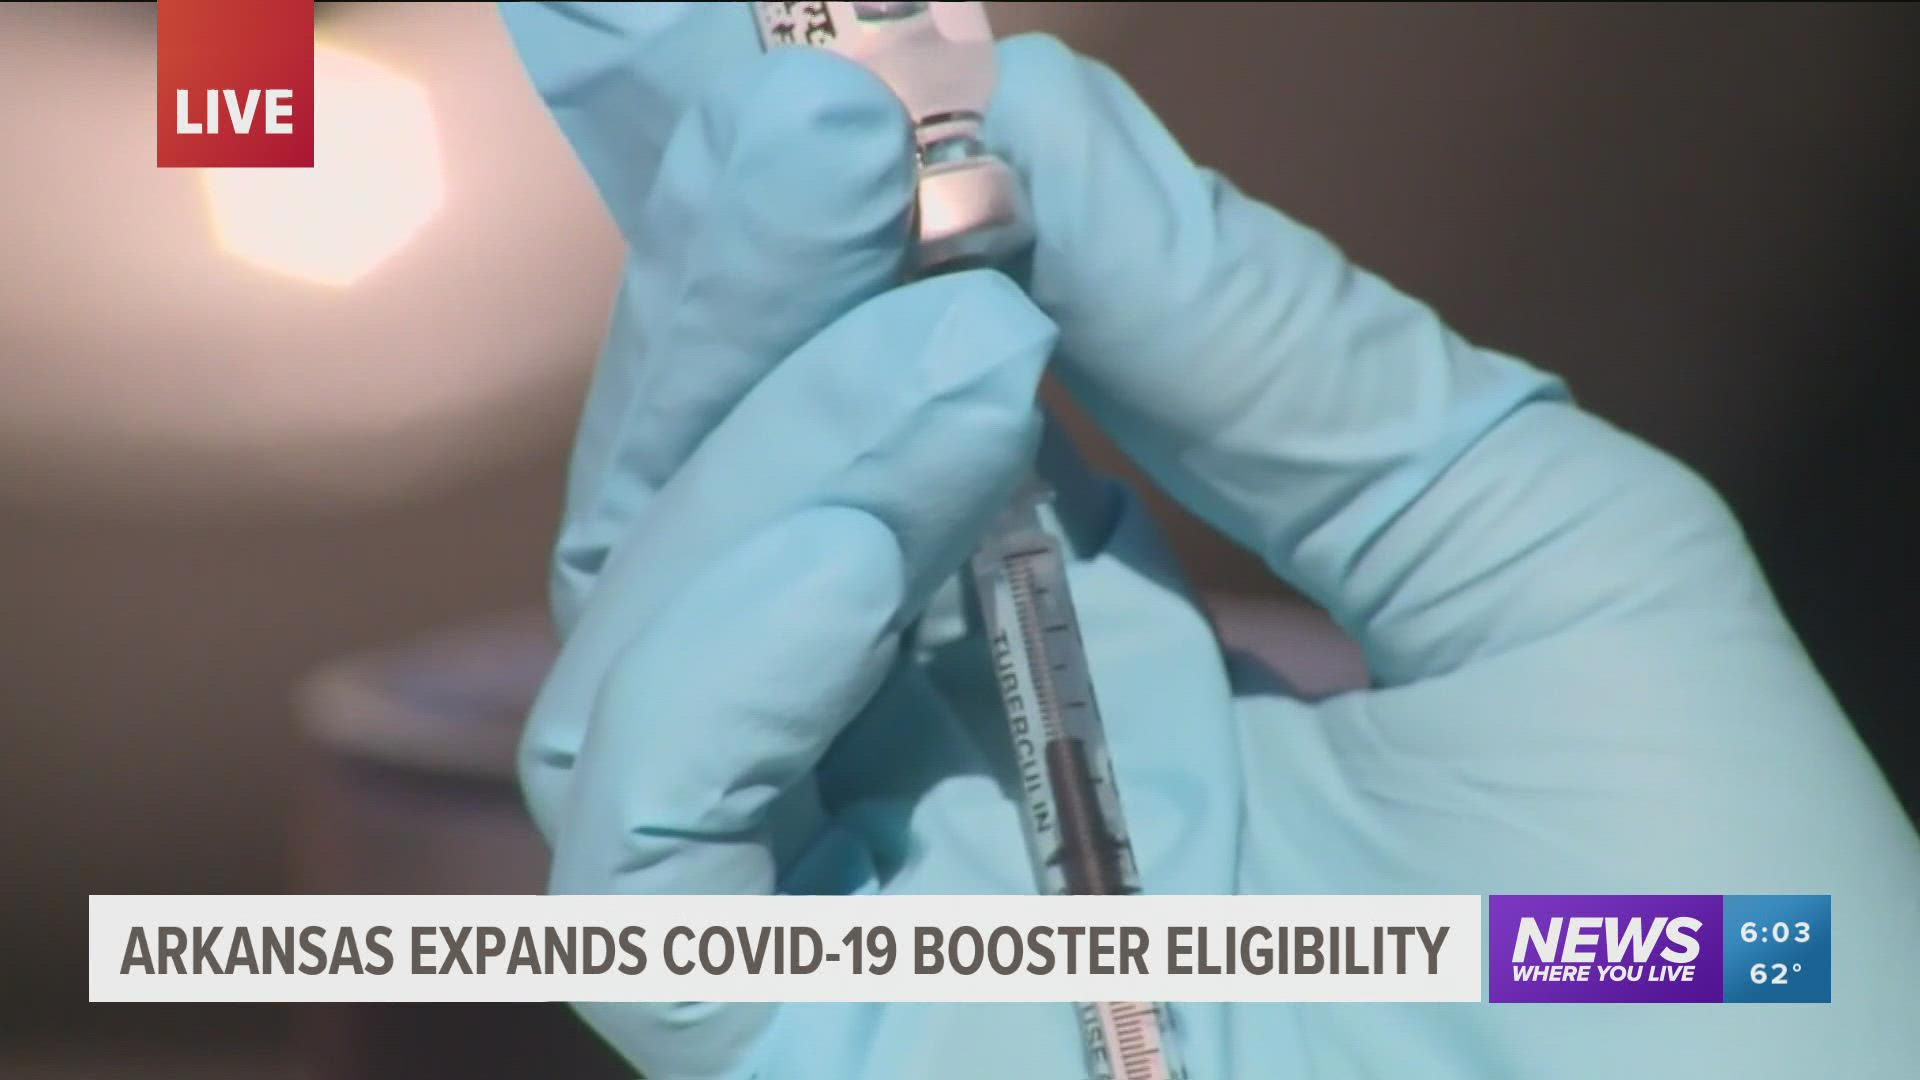 Before Monday's announcement, only certain groups of Arkansans were allowed to receive booster jabs.